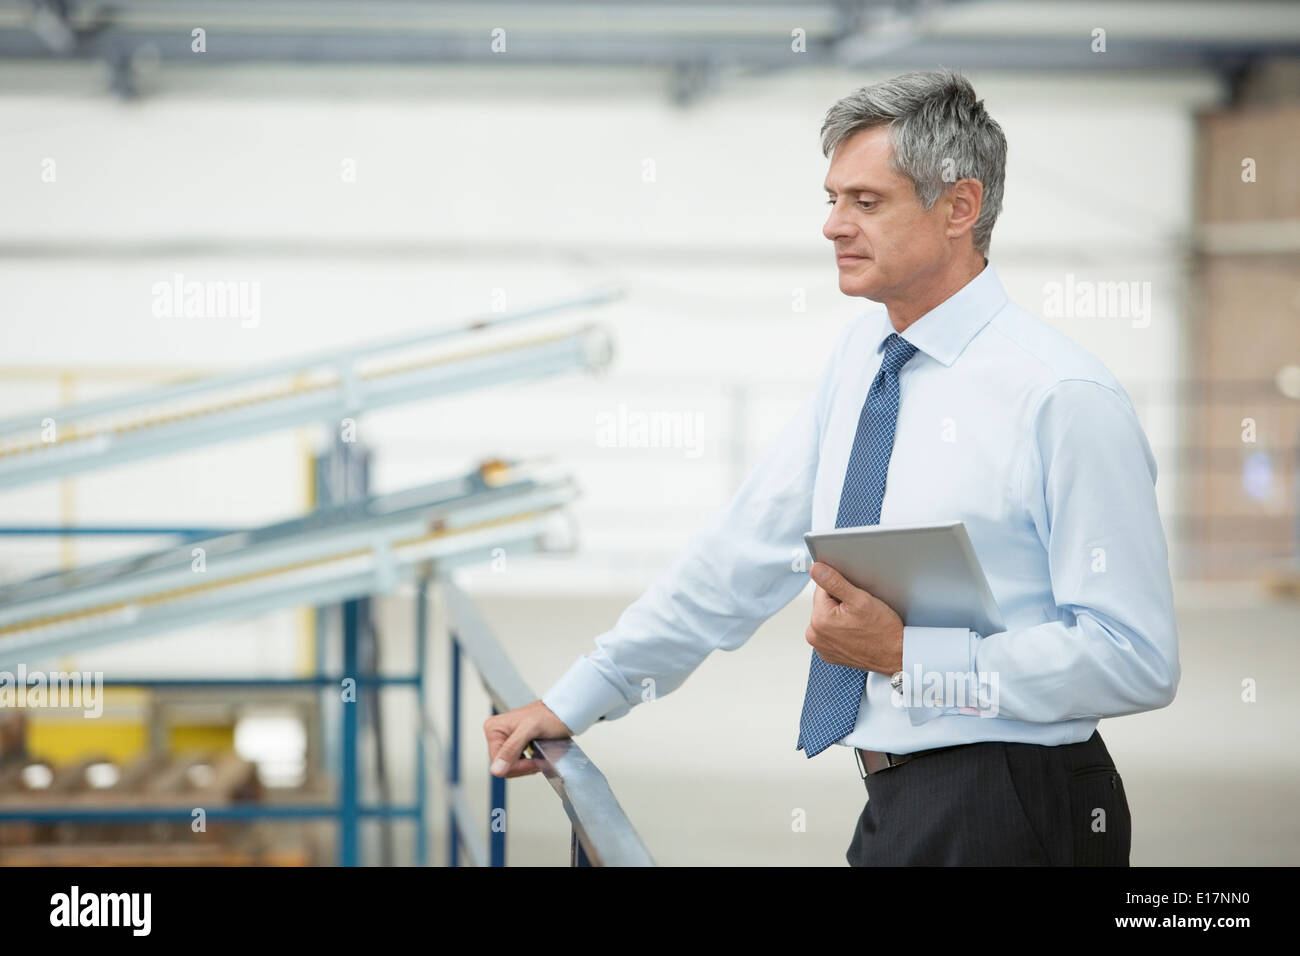 Supervisor with digital tablet in food processing plant Stock Photo